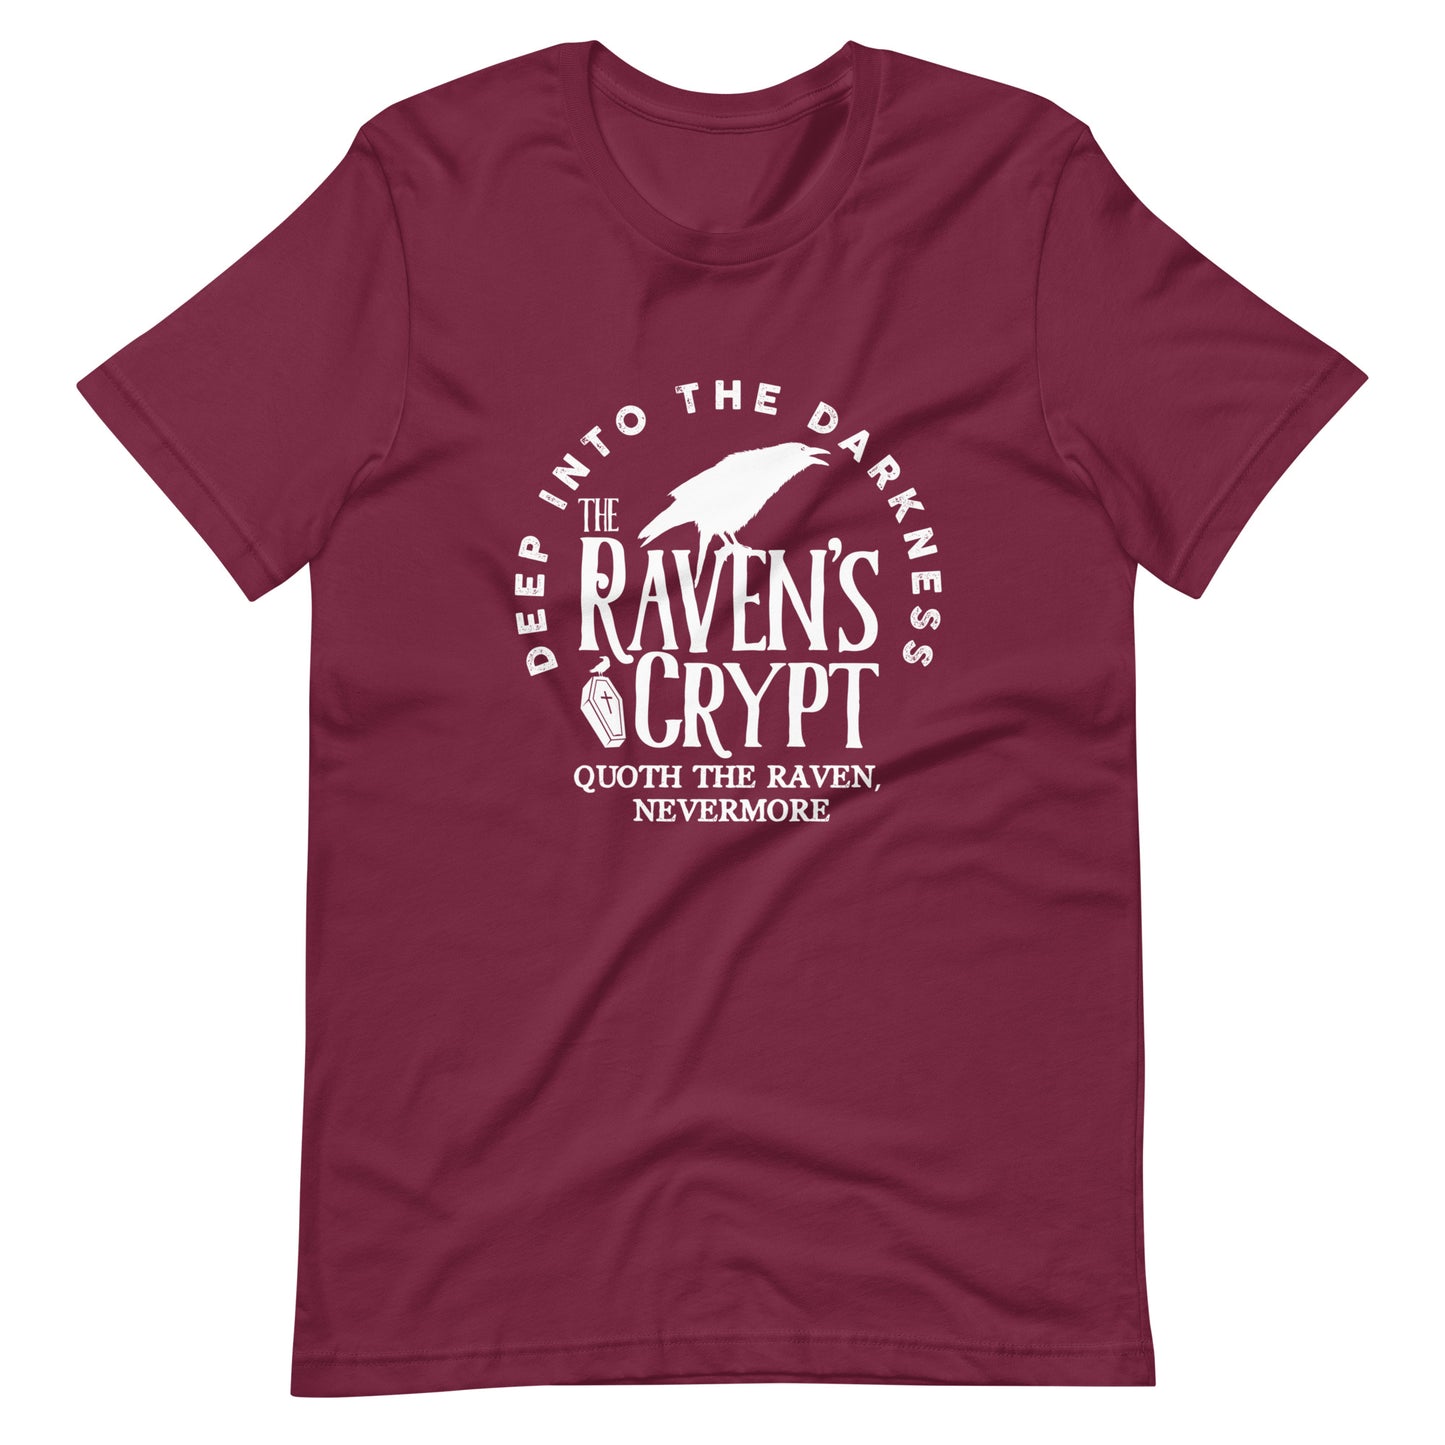 Deep Into the Darkness The Raven's Crypt - Men's t-shirt - Maroon Front